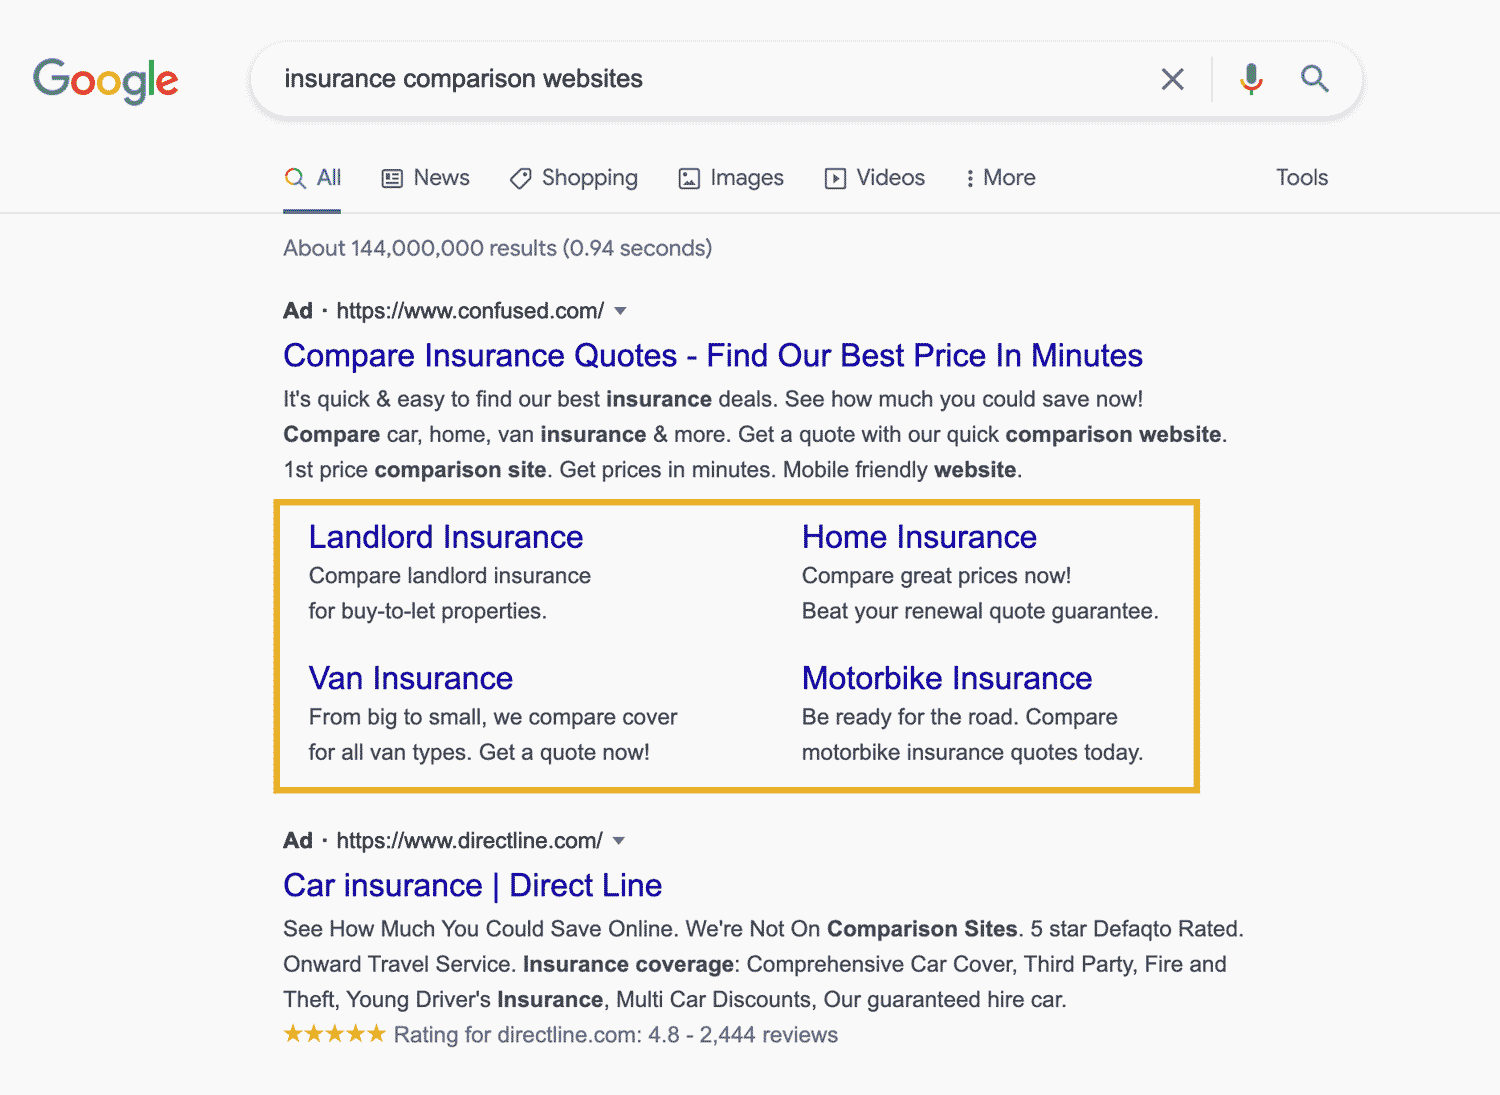 Sitelink ad extension taking up space in the SERP